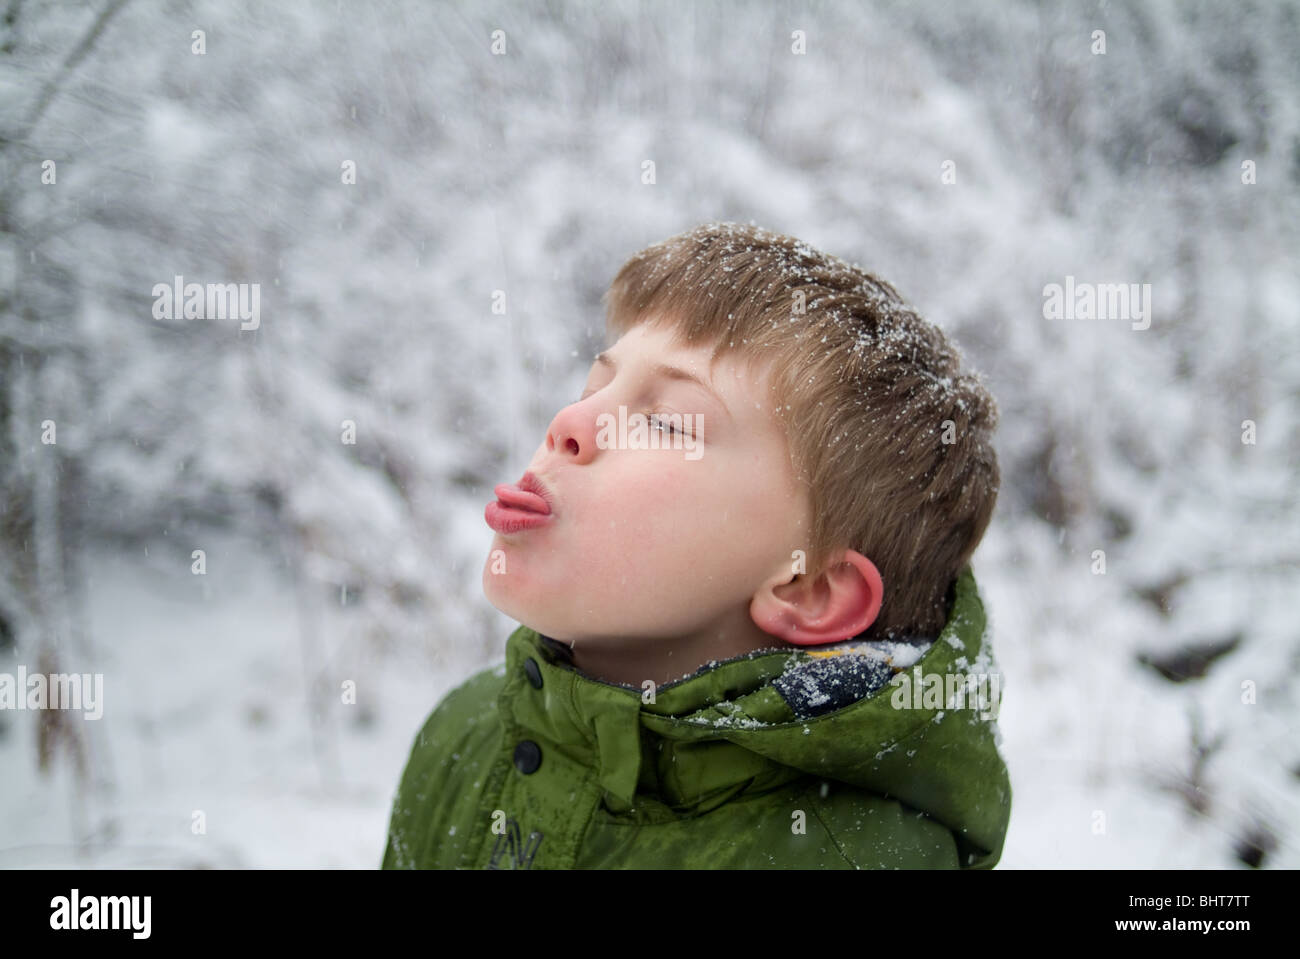 Small boy trying to catch snowflakes on tongue Stock Photo